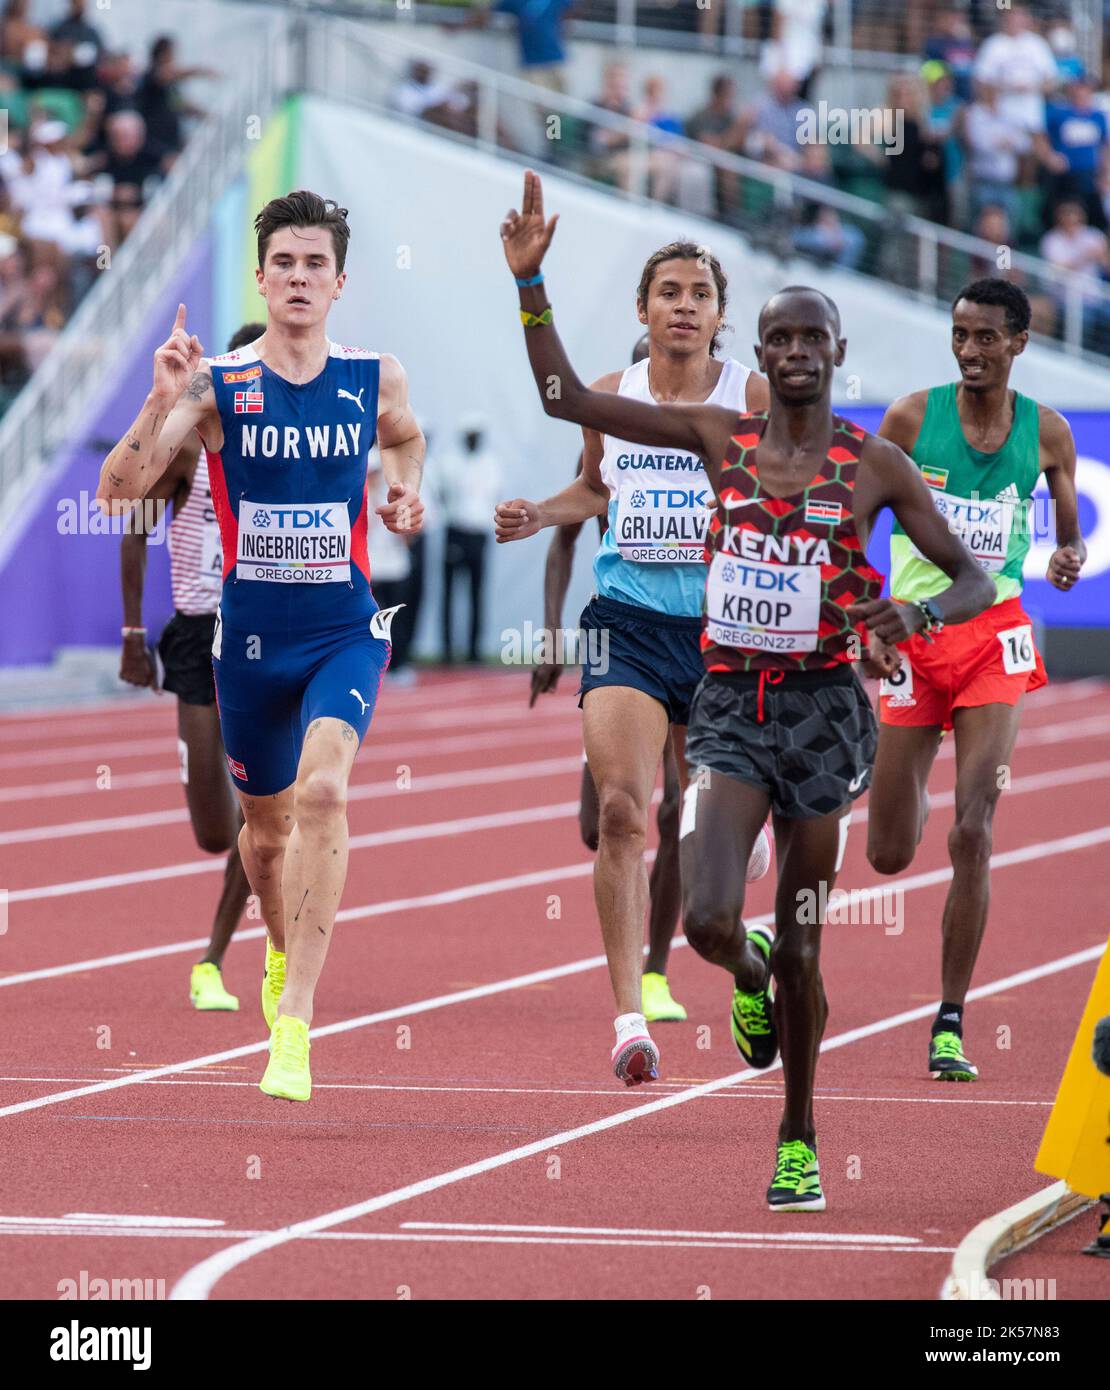 Jakob Ingebrigtsen of Norway and Jacob Krop of Kenya competing in the men’s 5000m heats at the World Athletics Championships, Hayward Field, Eugene, O Stock Photo